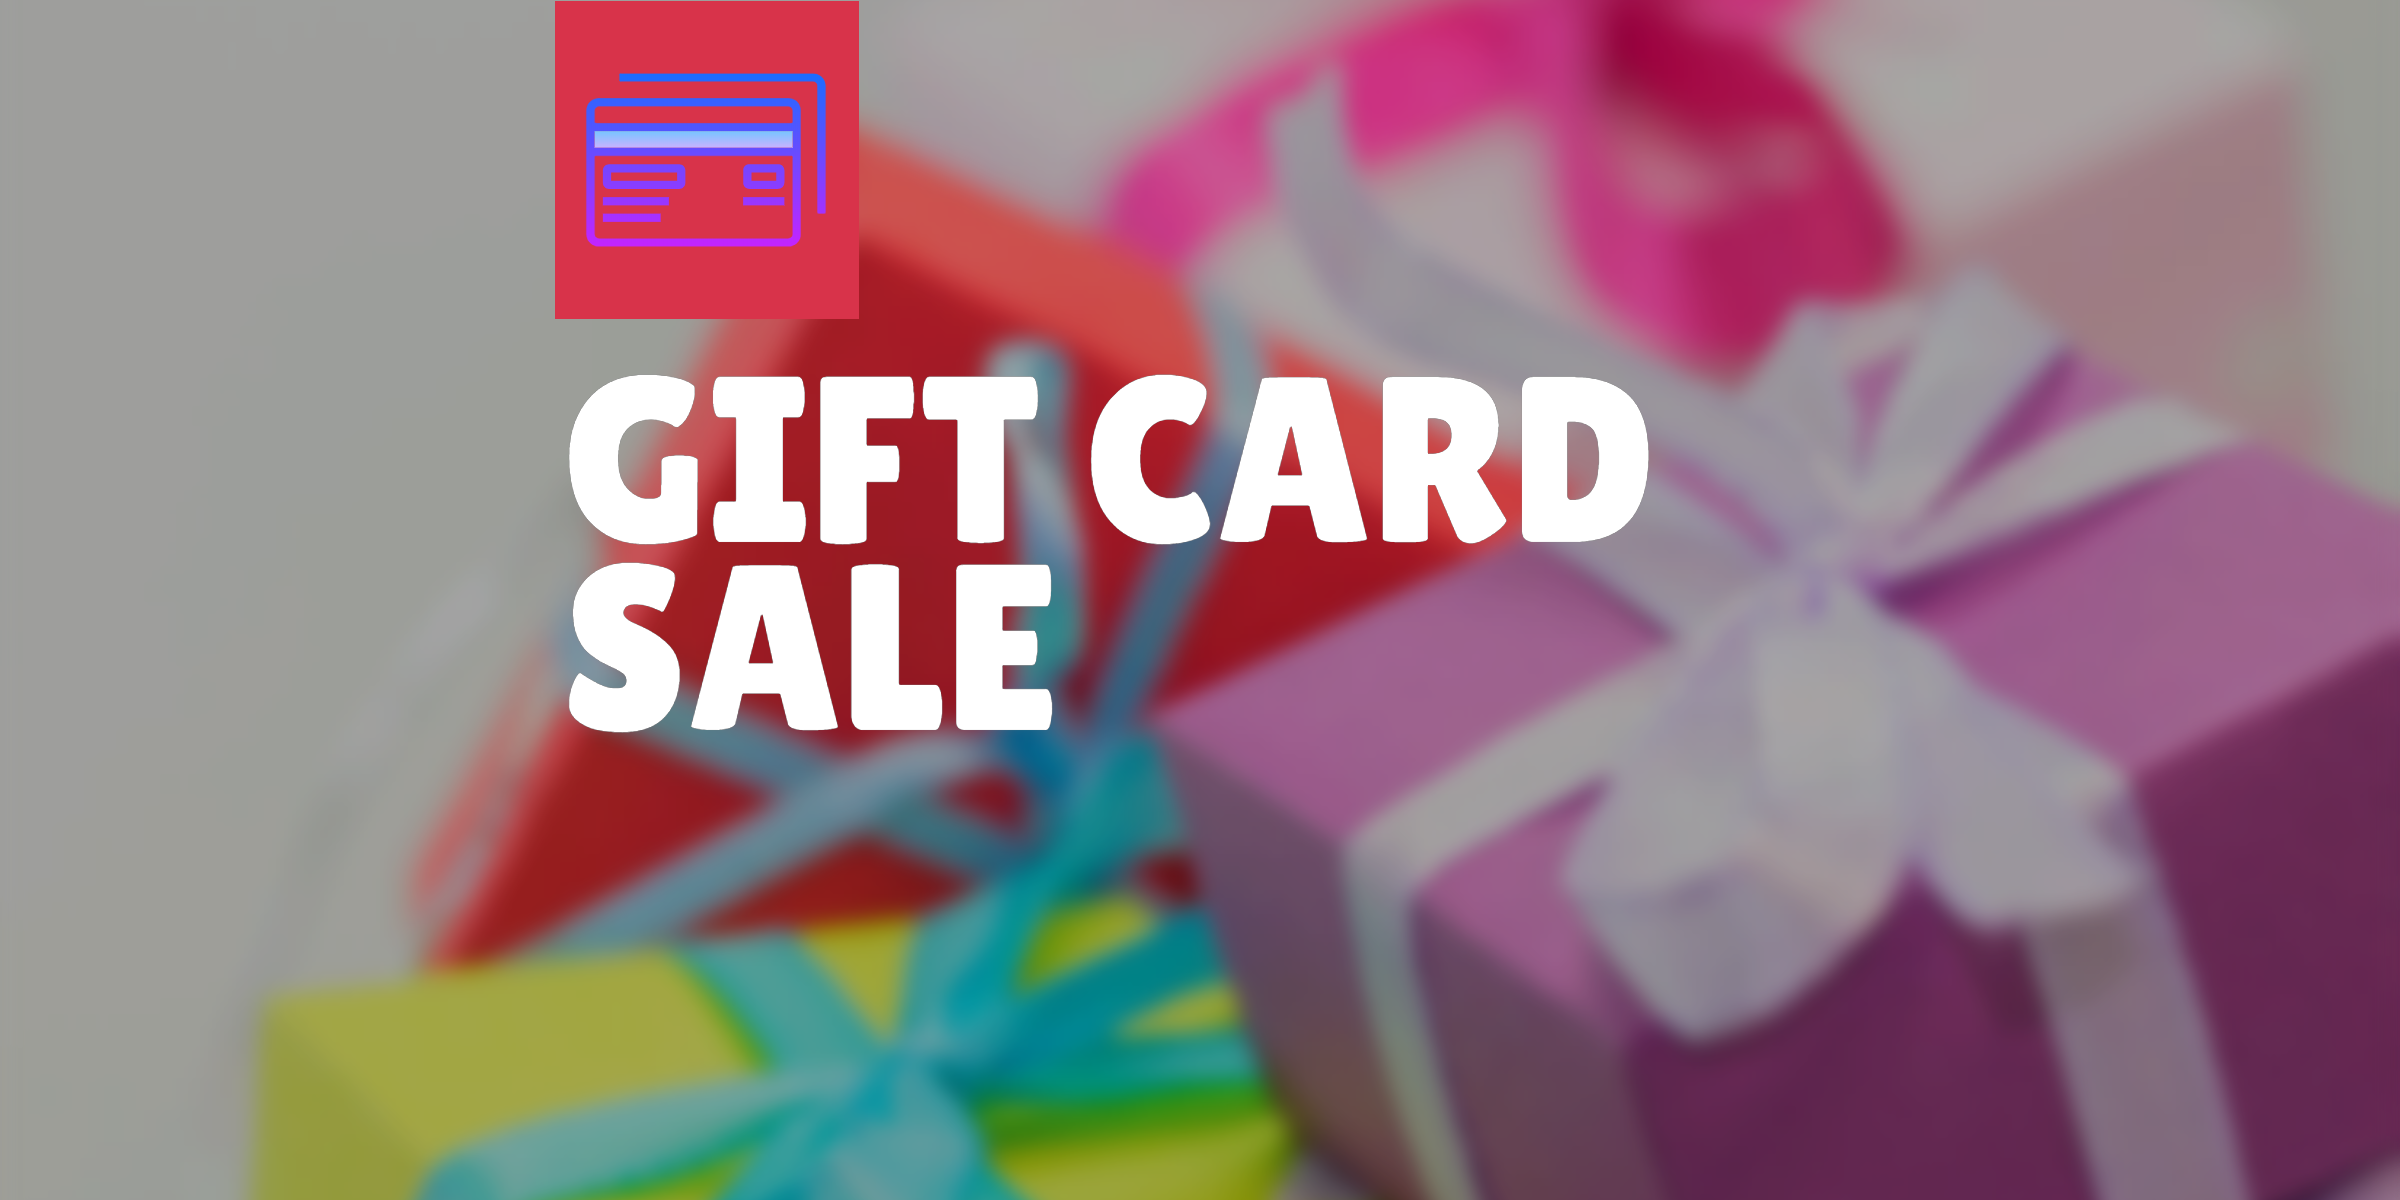 Get 12.5%-30% Off Many Gift Cards Plus Fuel Points At Kroger Online - Miles to Memories